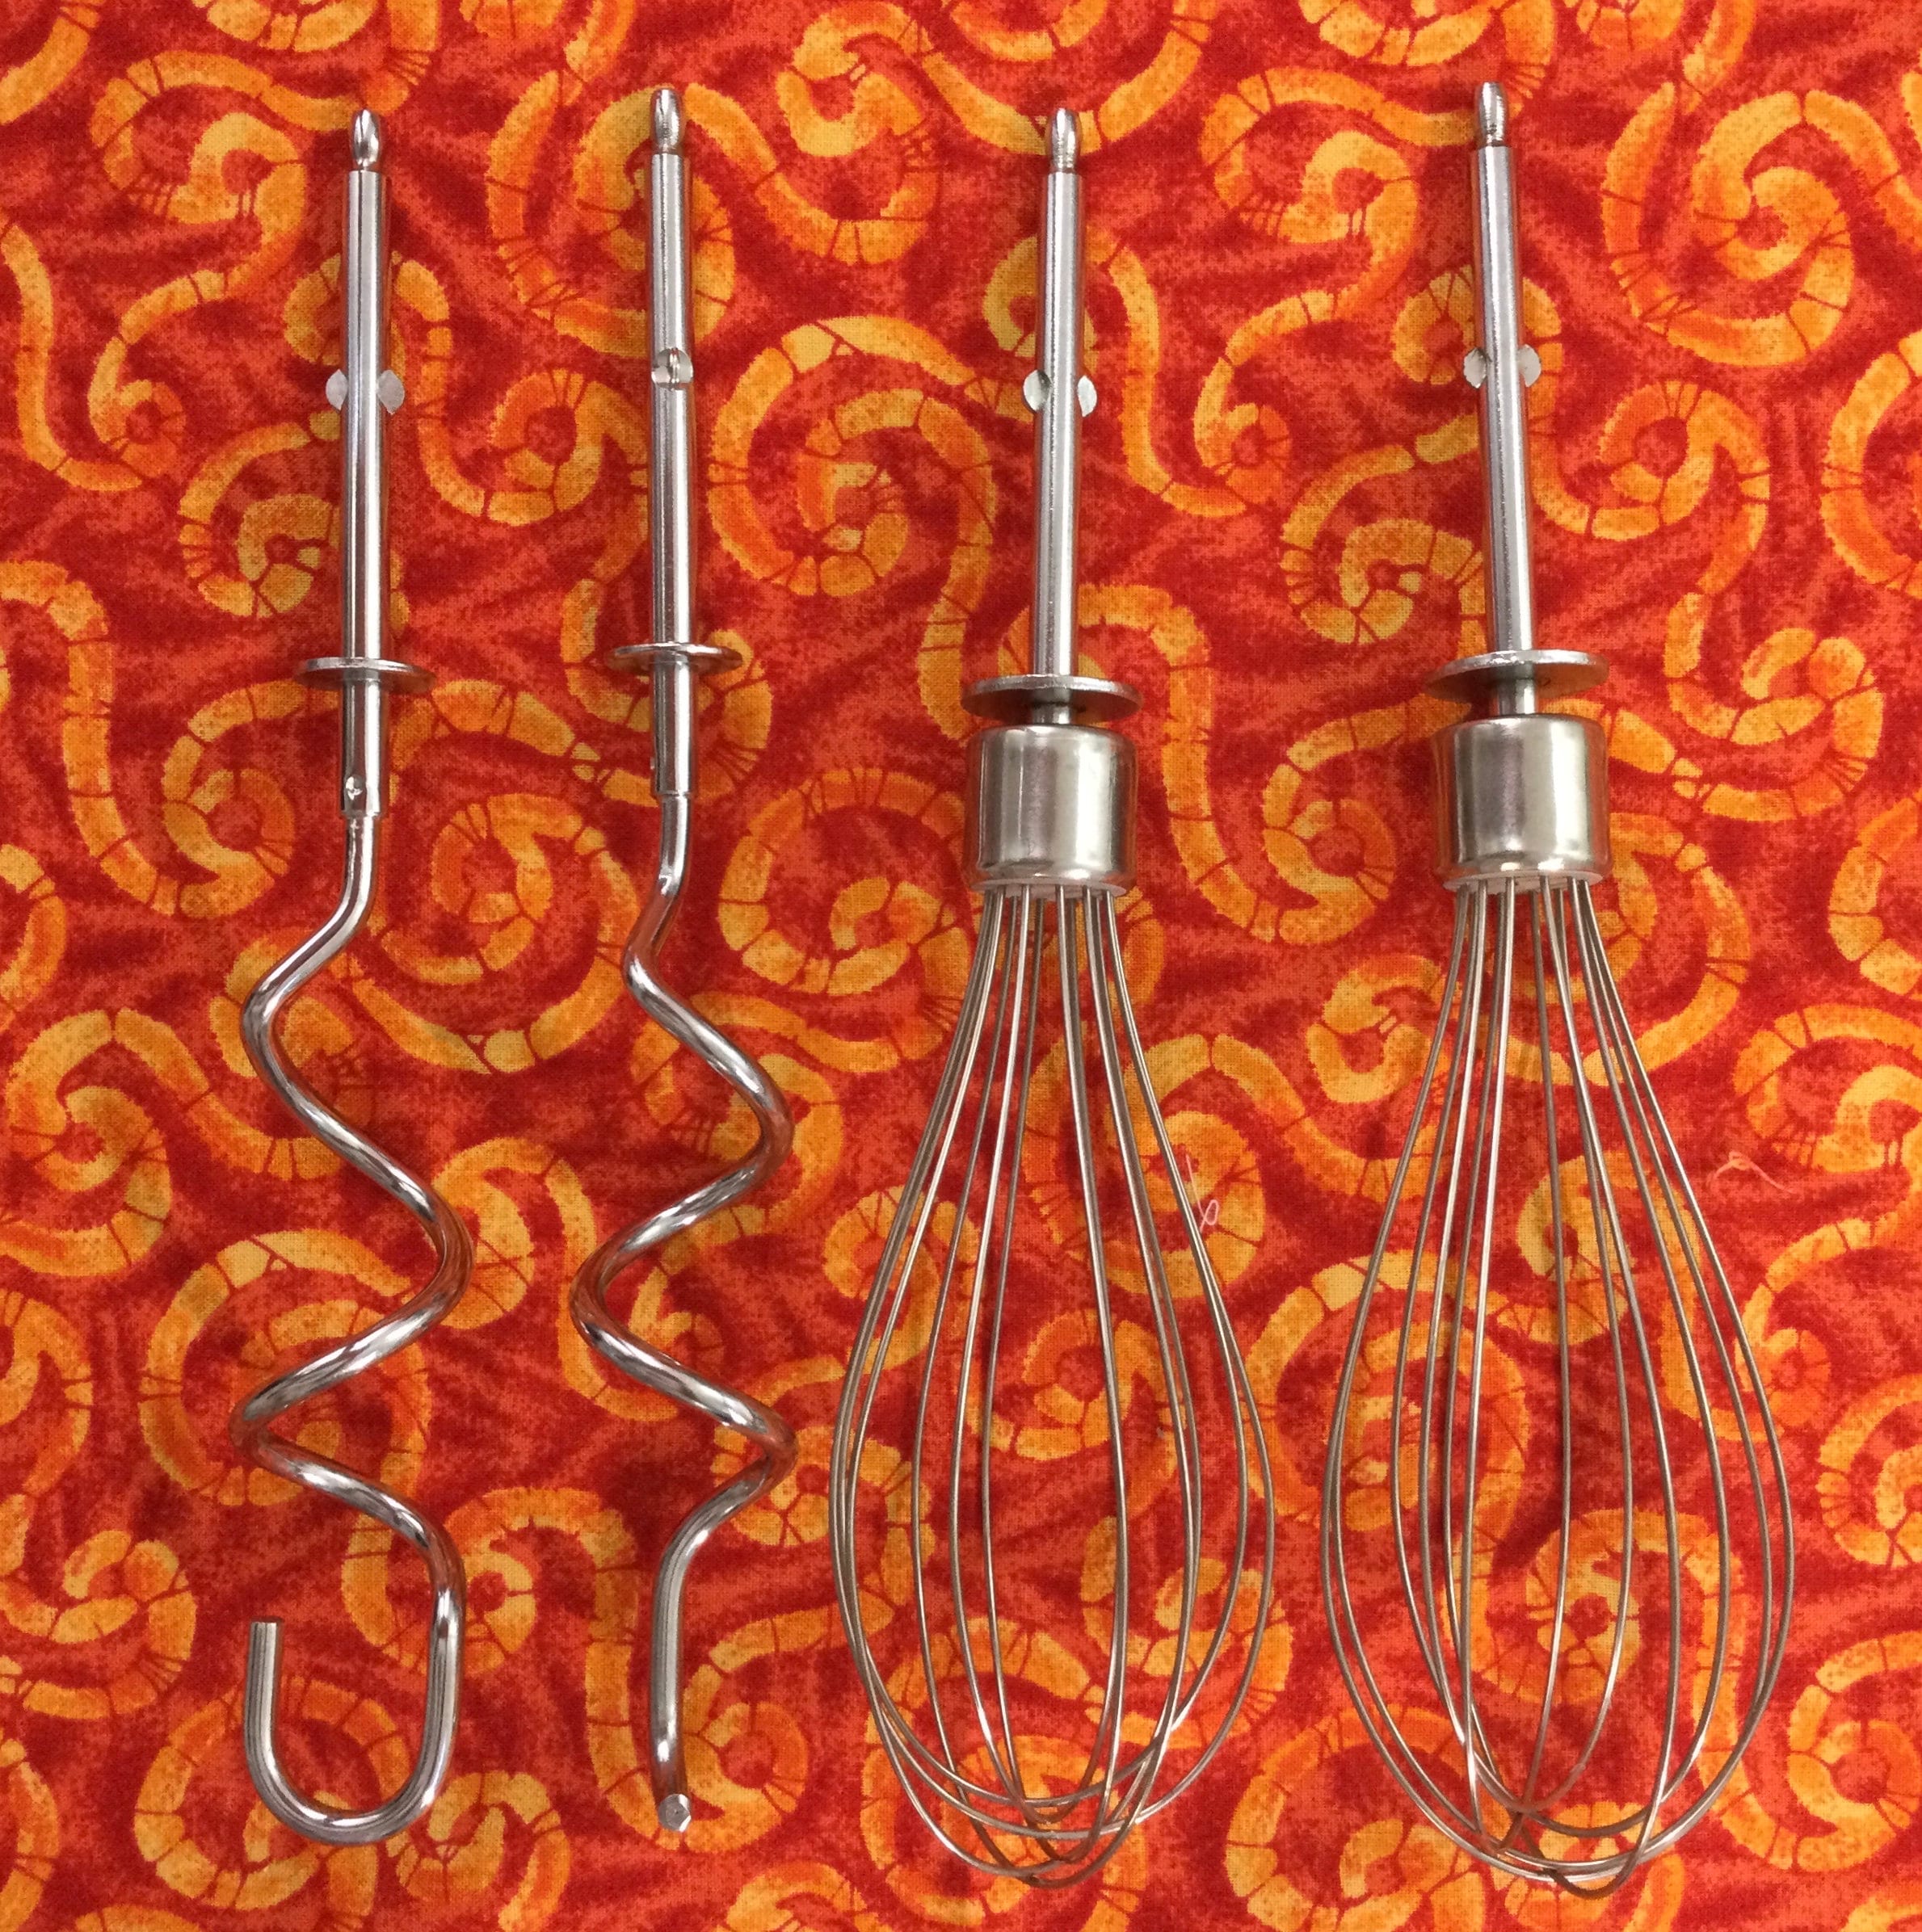 Mini Flexible Whisk Available in 5 or 7 Great for Crafting Projects see Pic  3 Cust. Graciously Allowed Me to Use for Example Use/size 